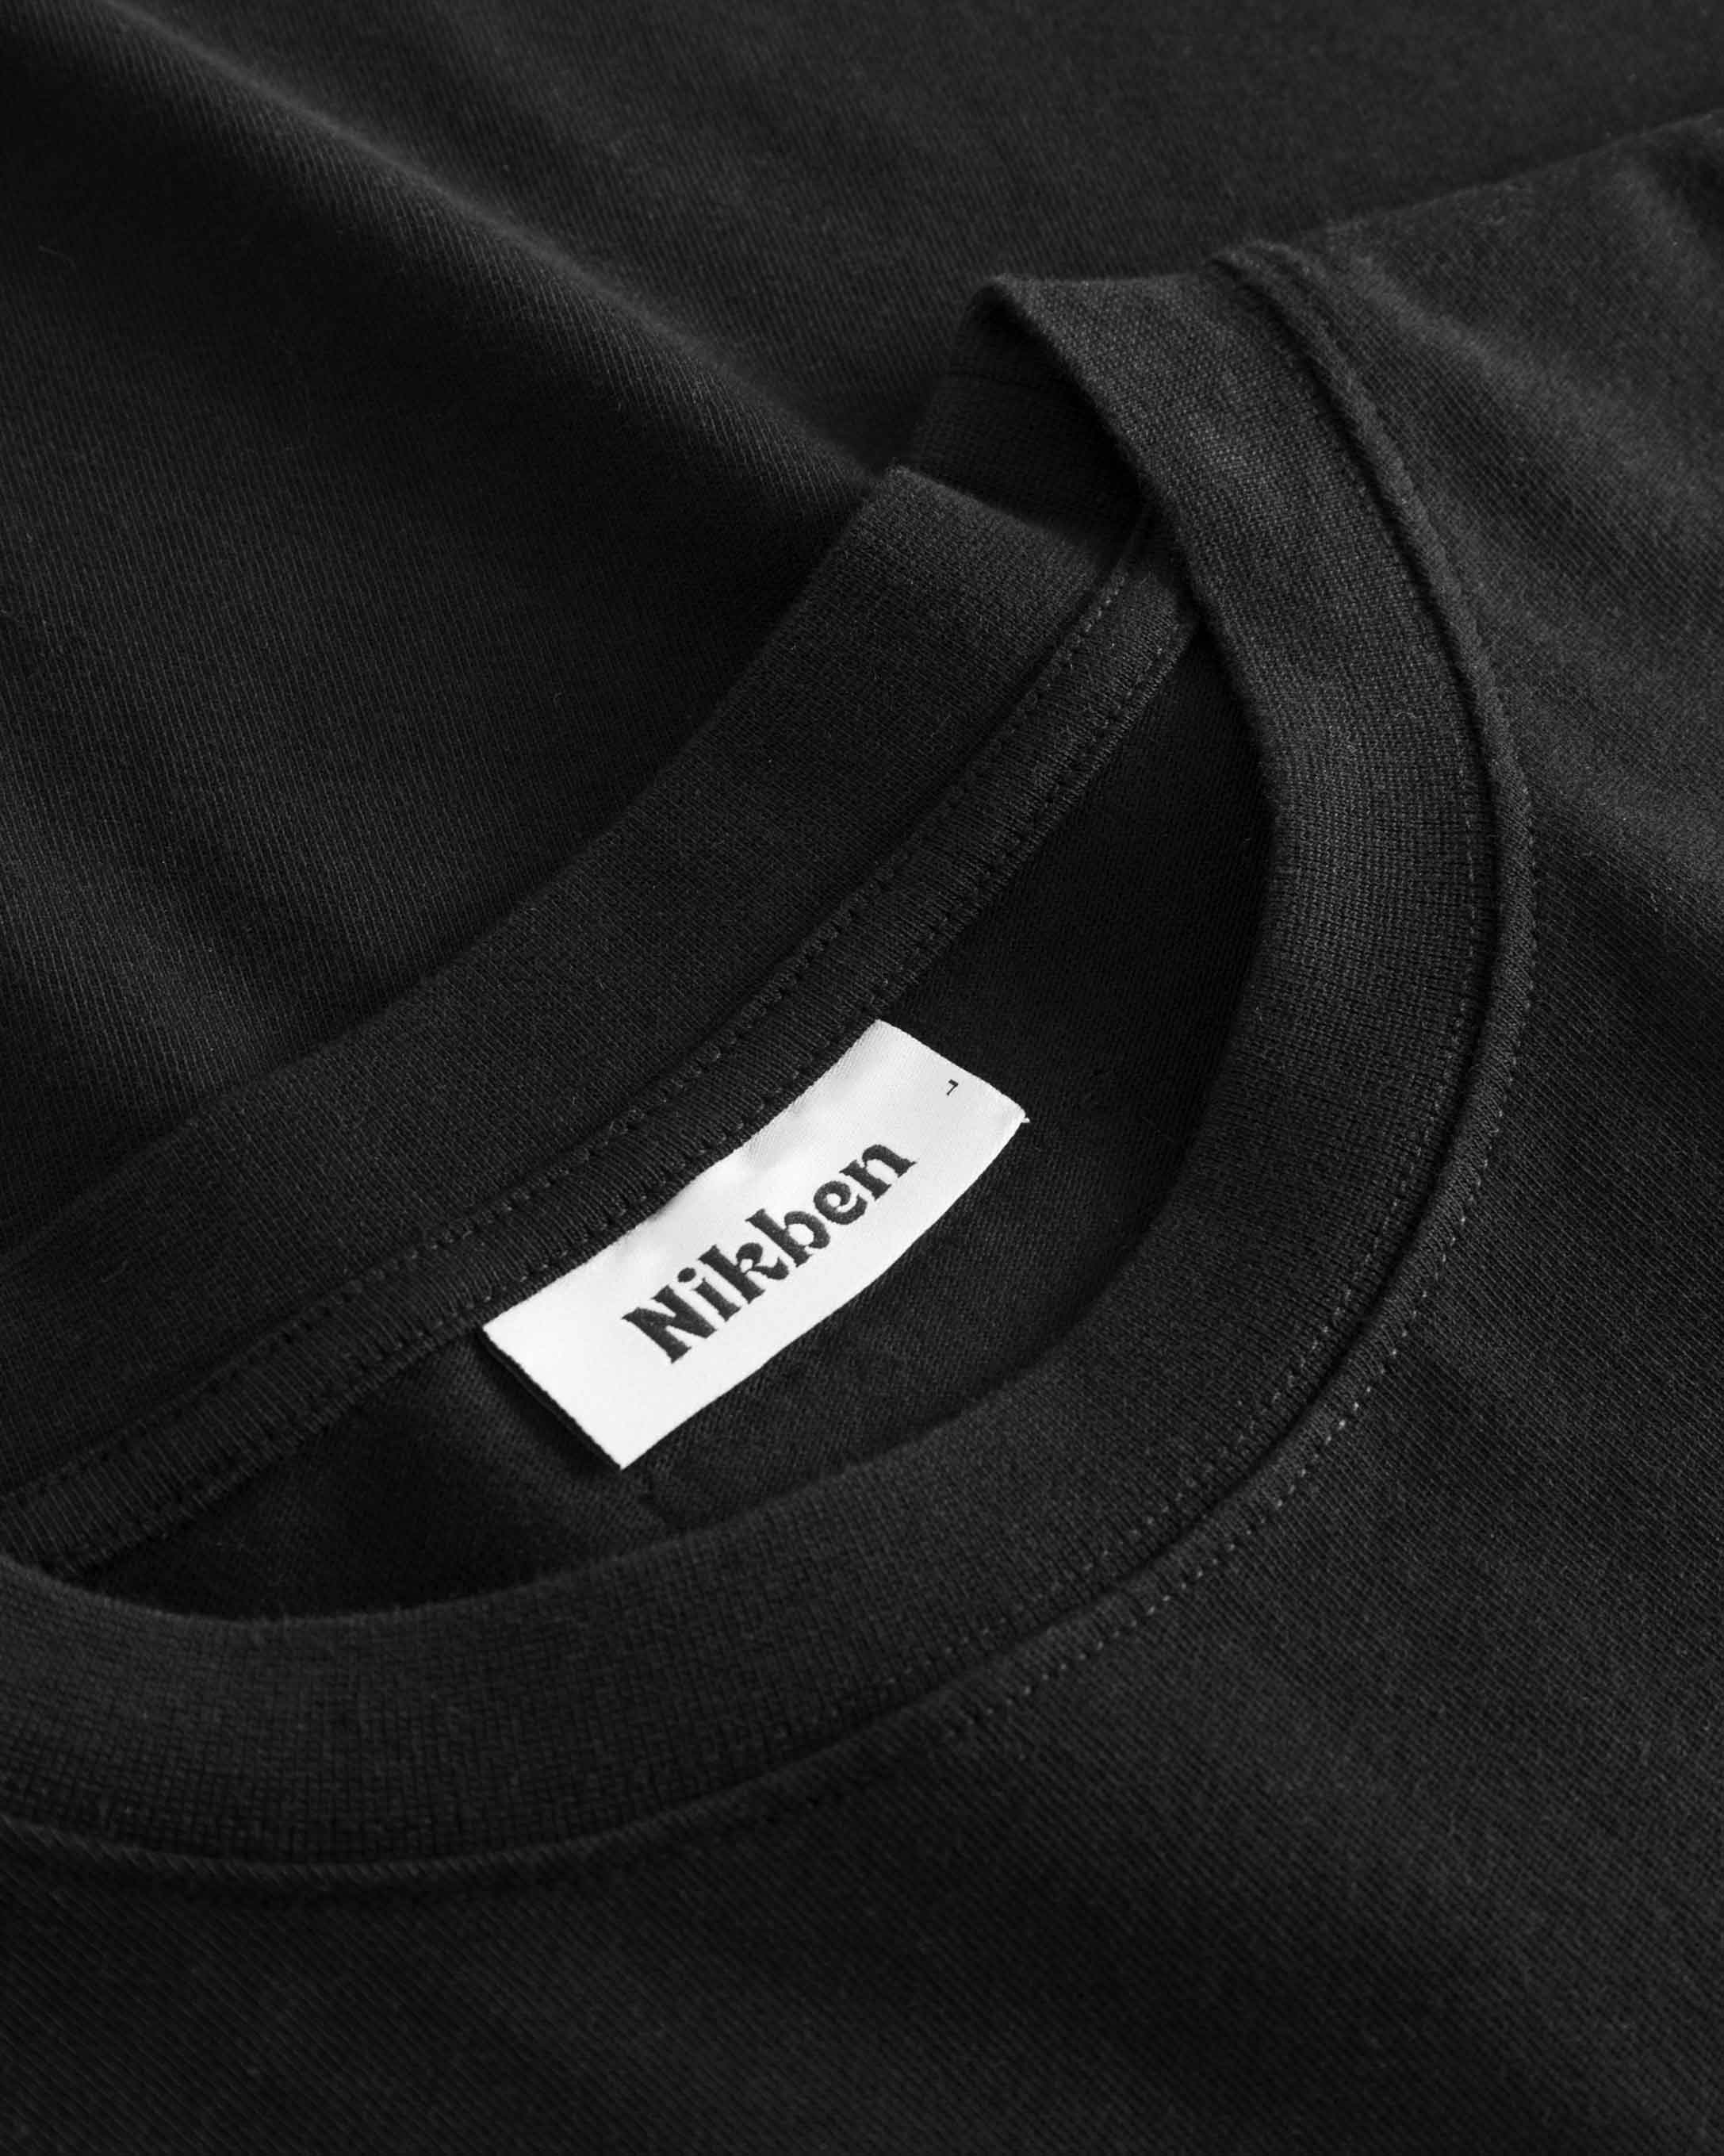 Close-up view of the round neck and stitchings on a black t-shirt.